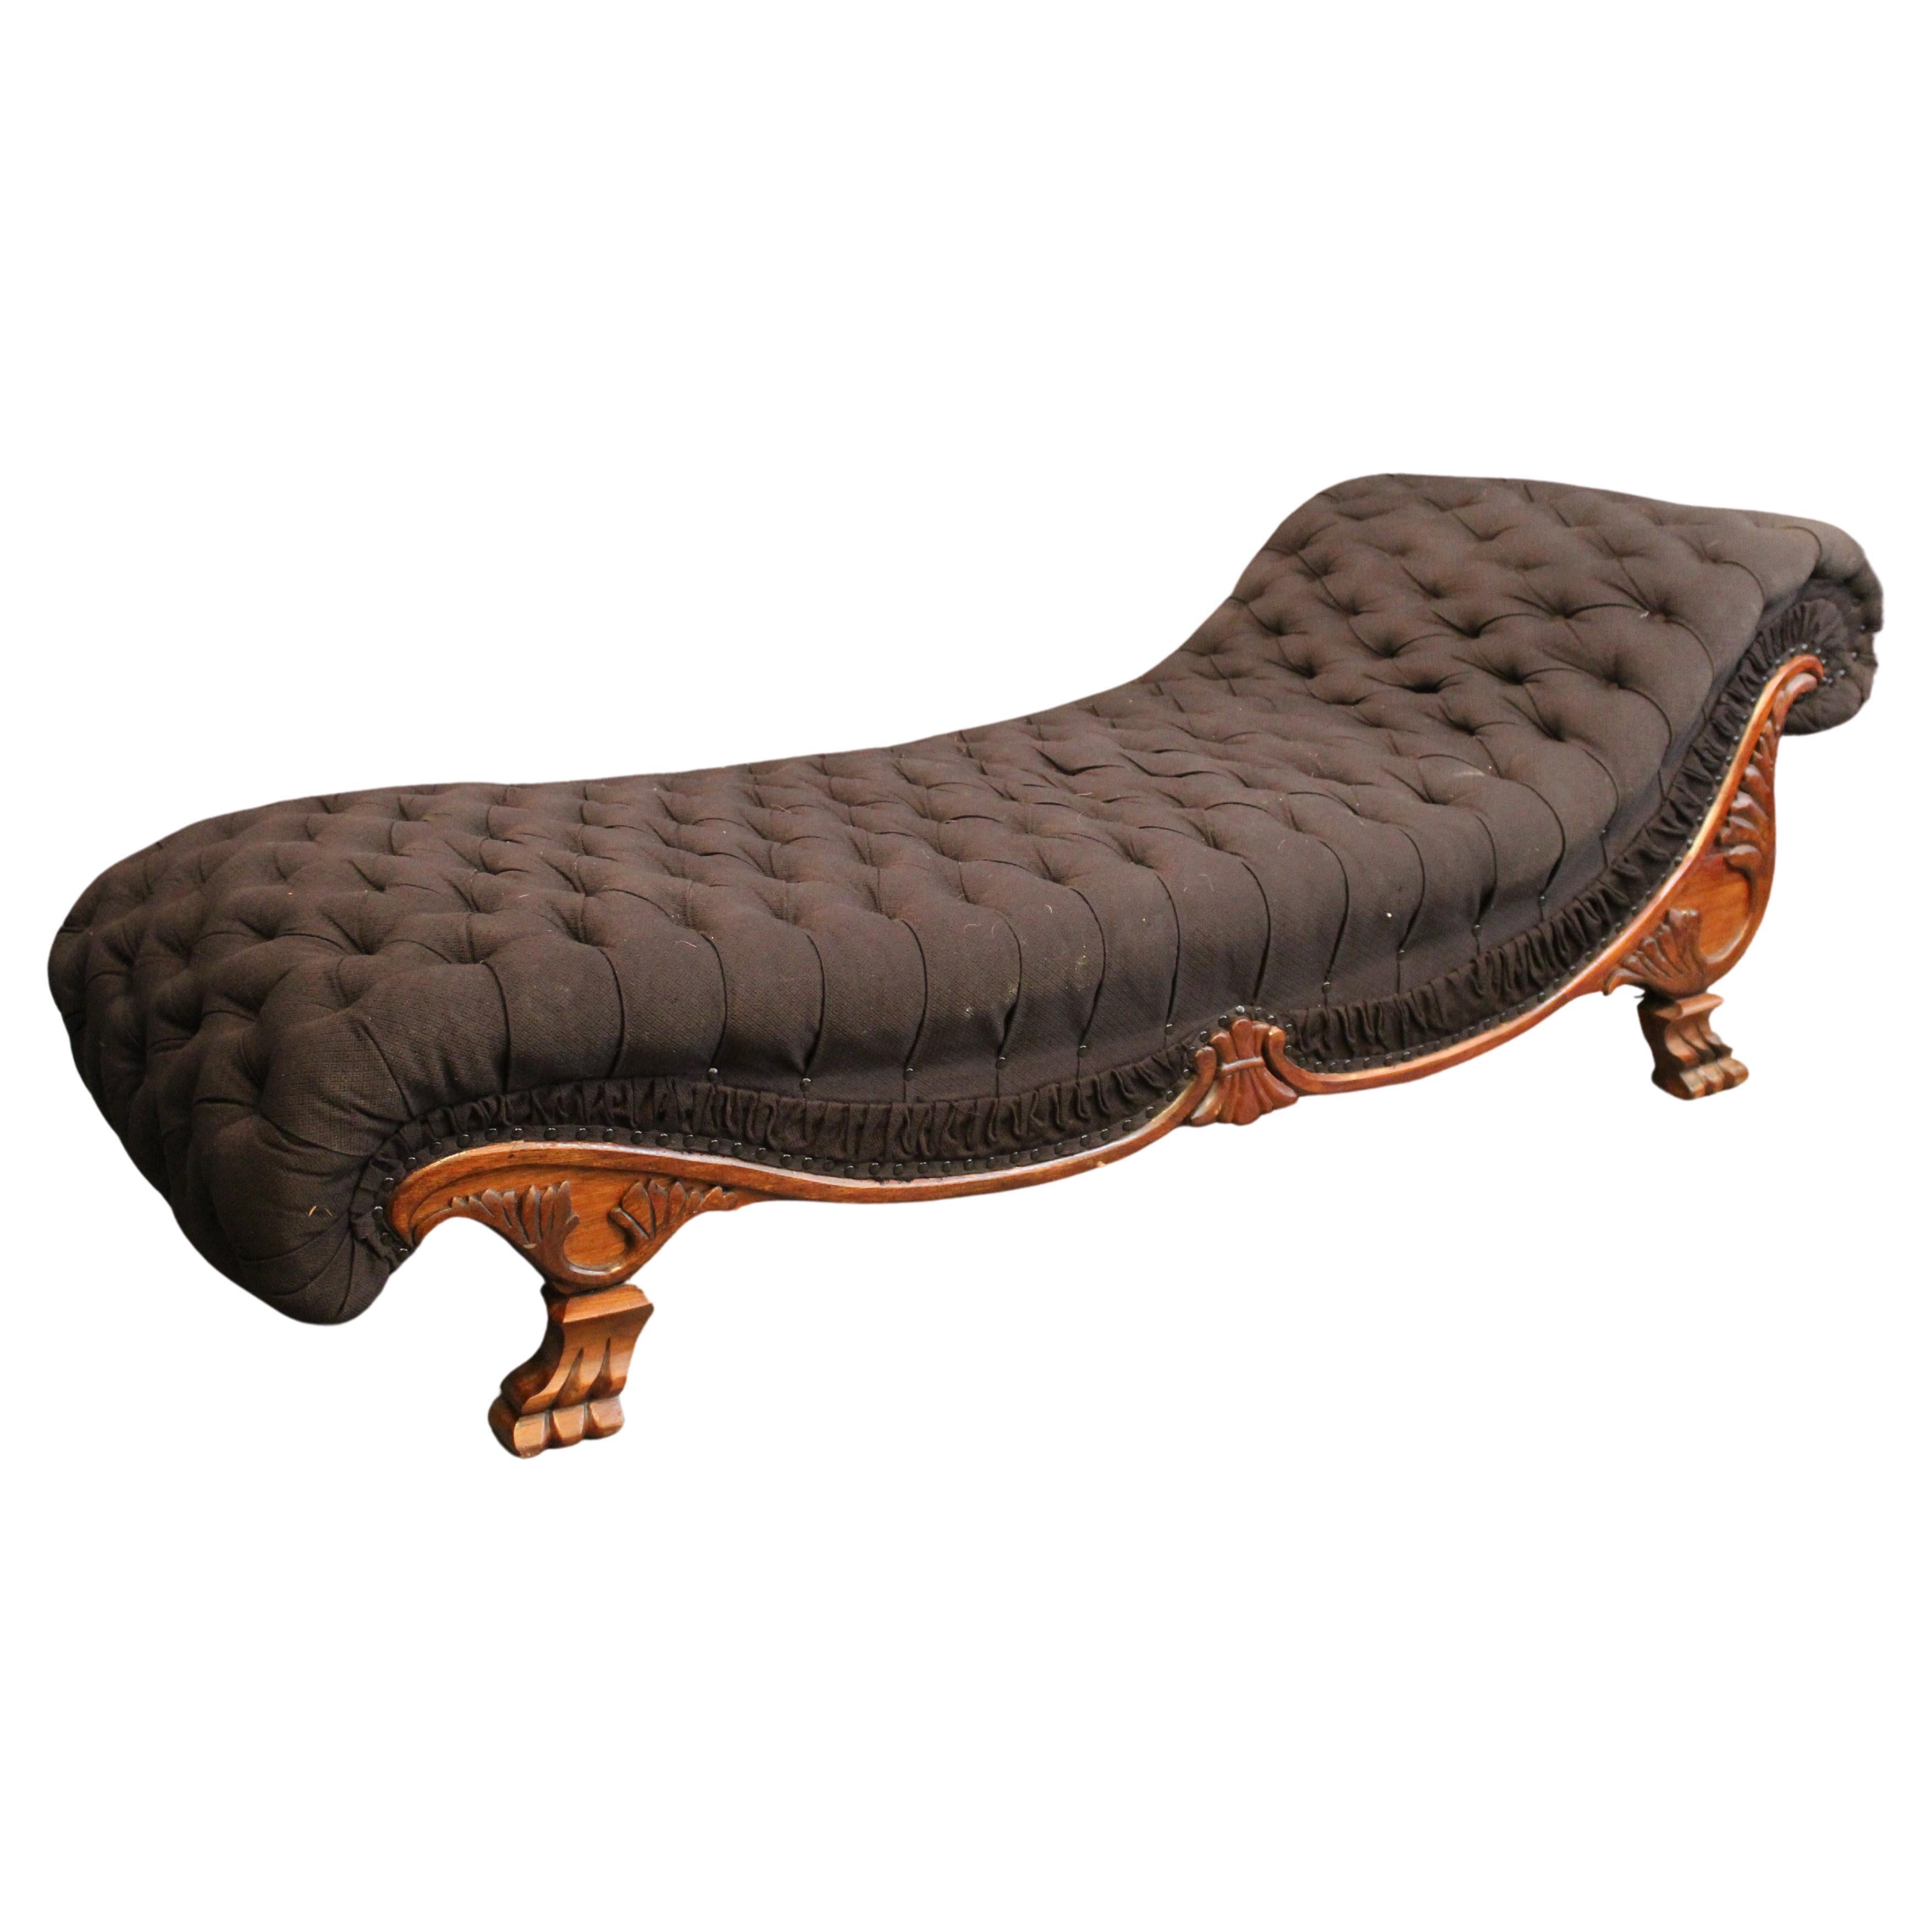 What is a Victorian fainting couch?